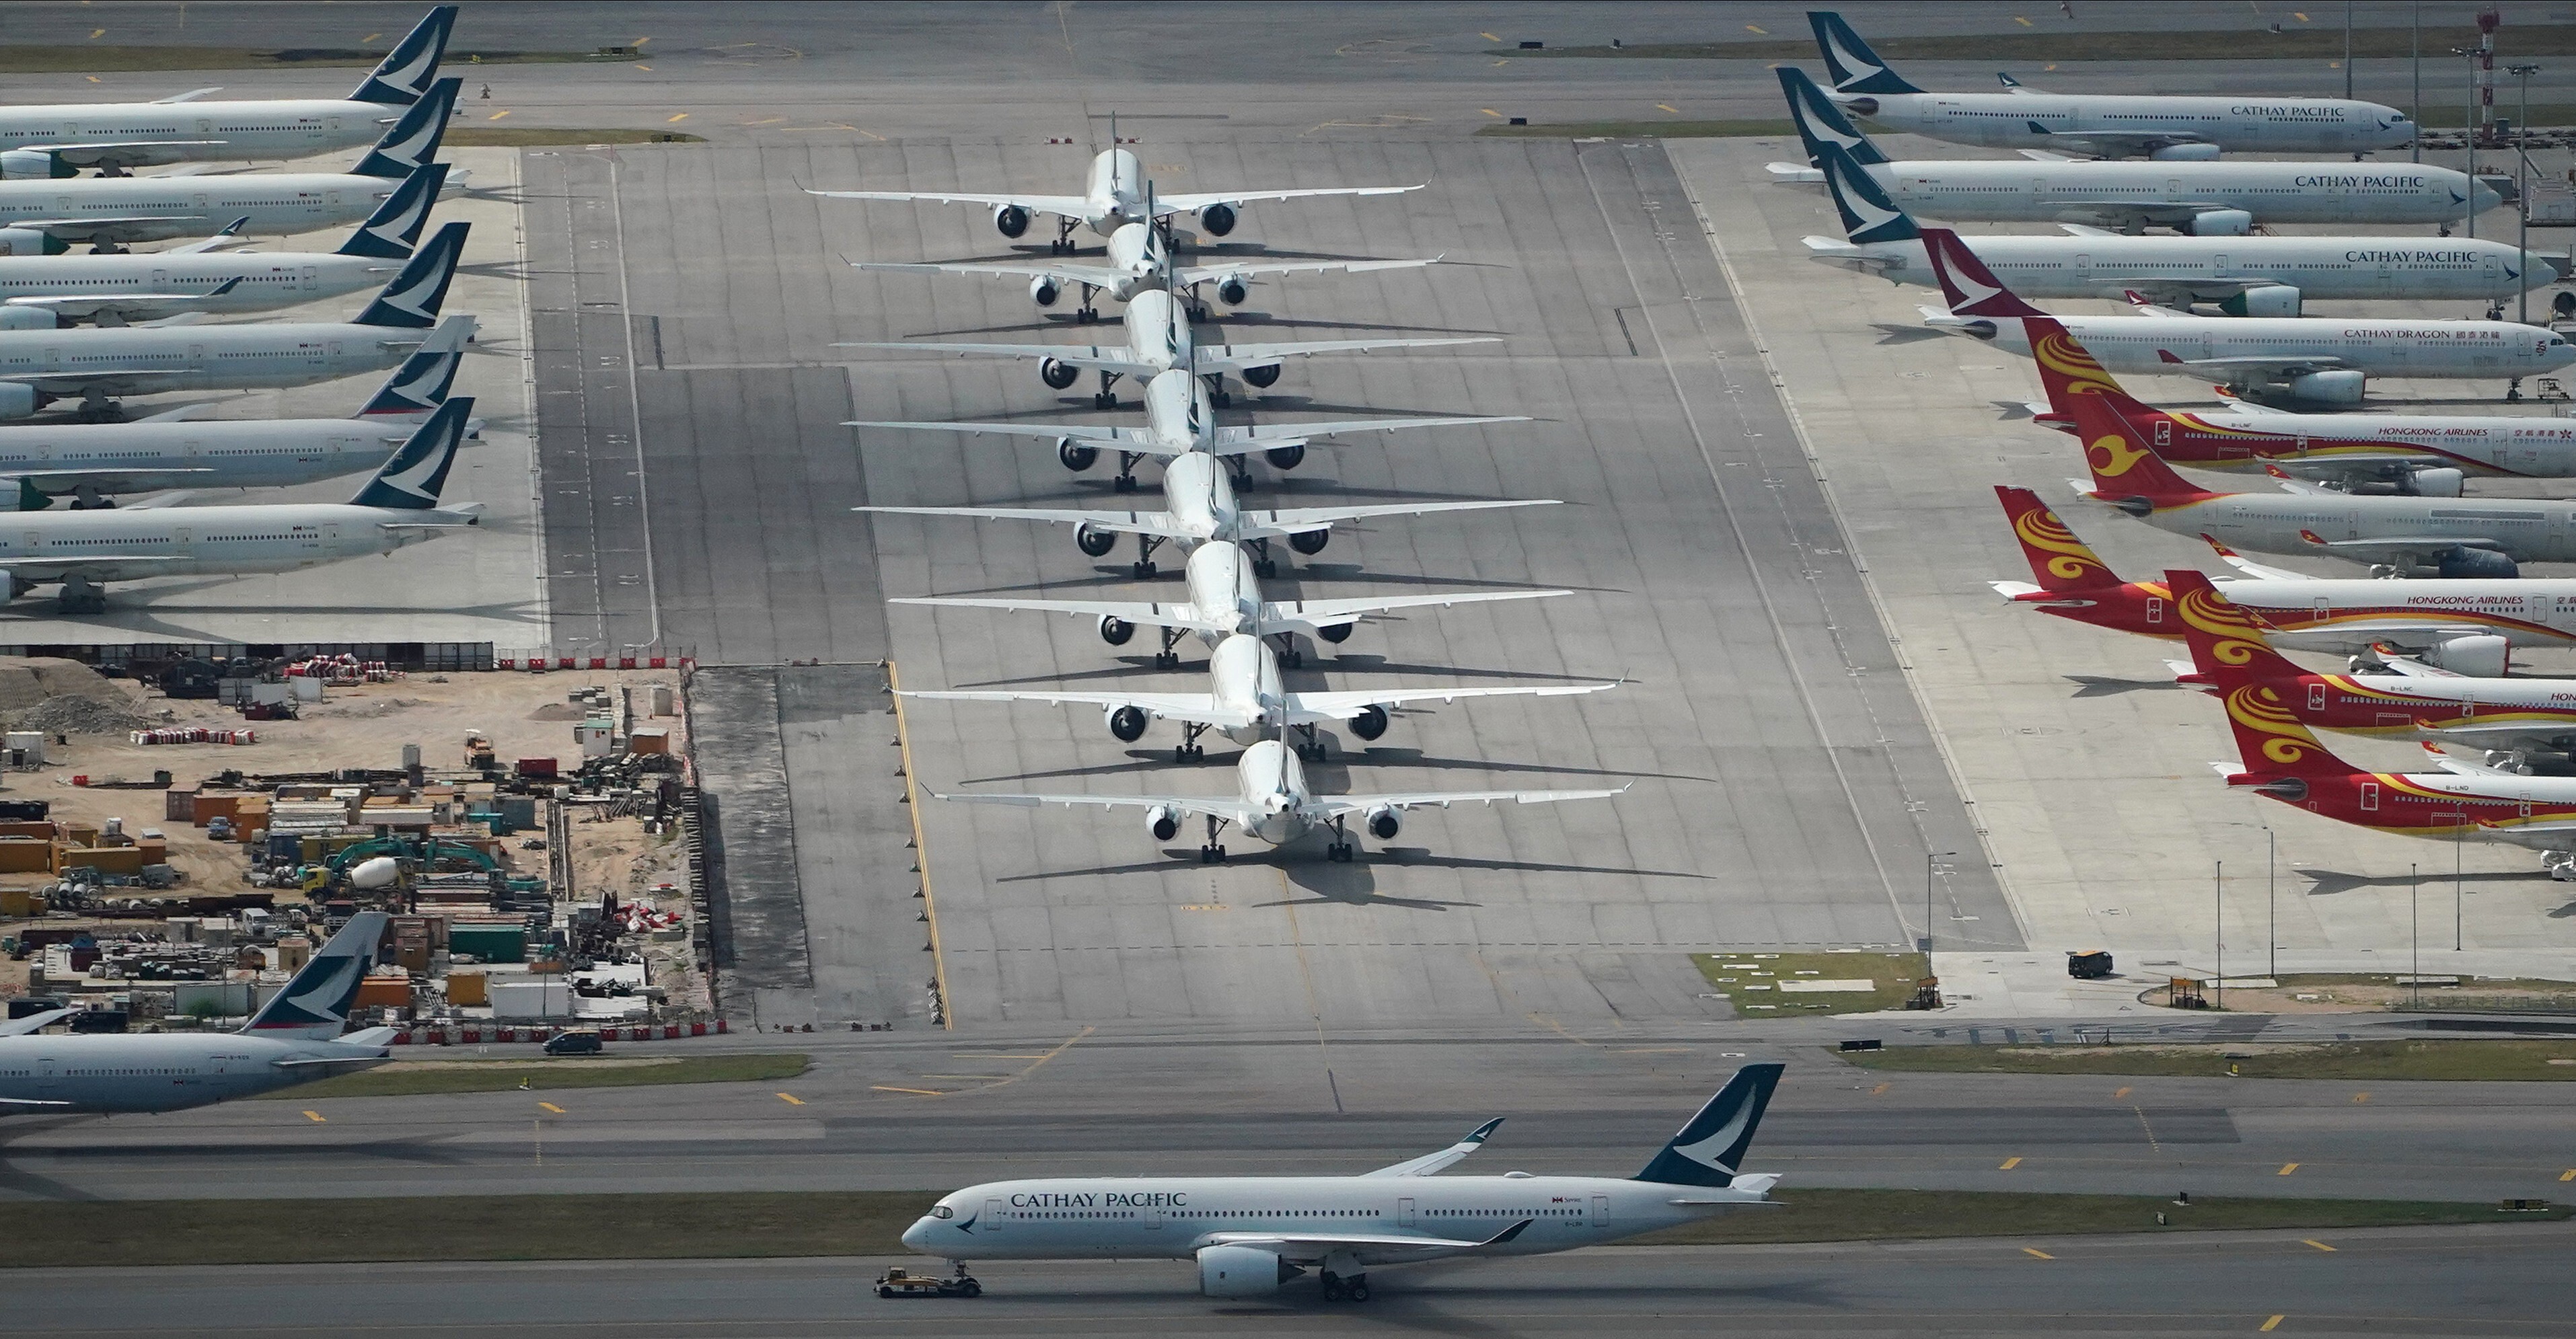 Battered by the coronavirus pandemic, Cathay Pacific has cut its flights and plans to put about a third of its passenger planes in long-term storage. Photo: Felix Wong